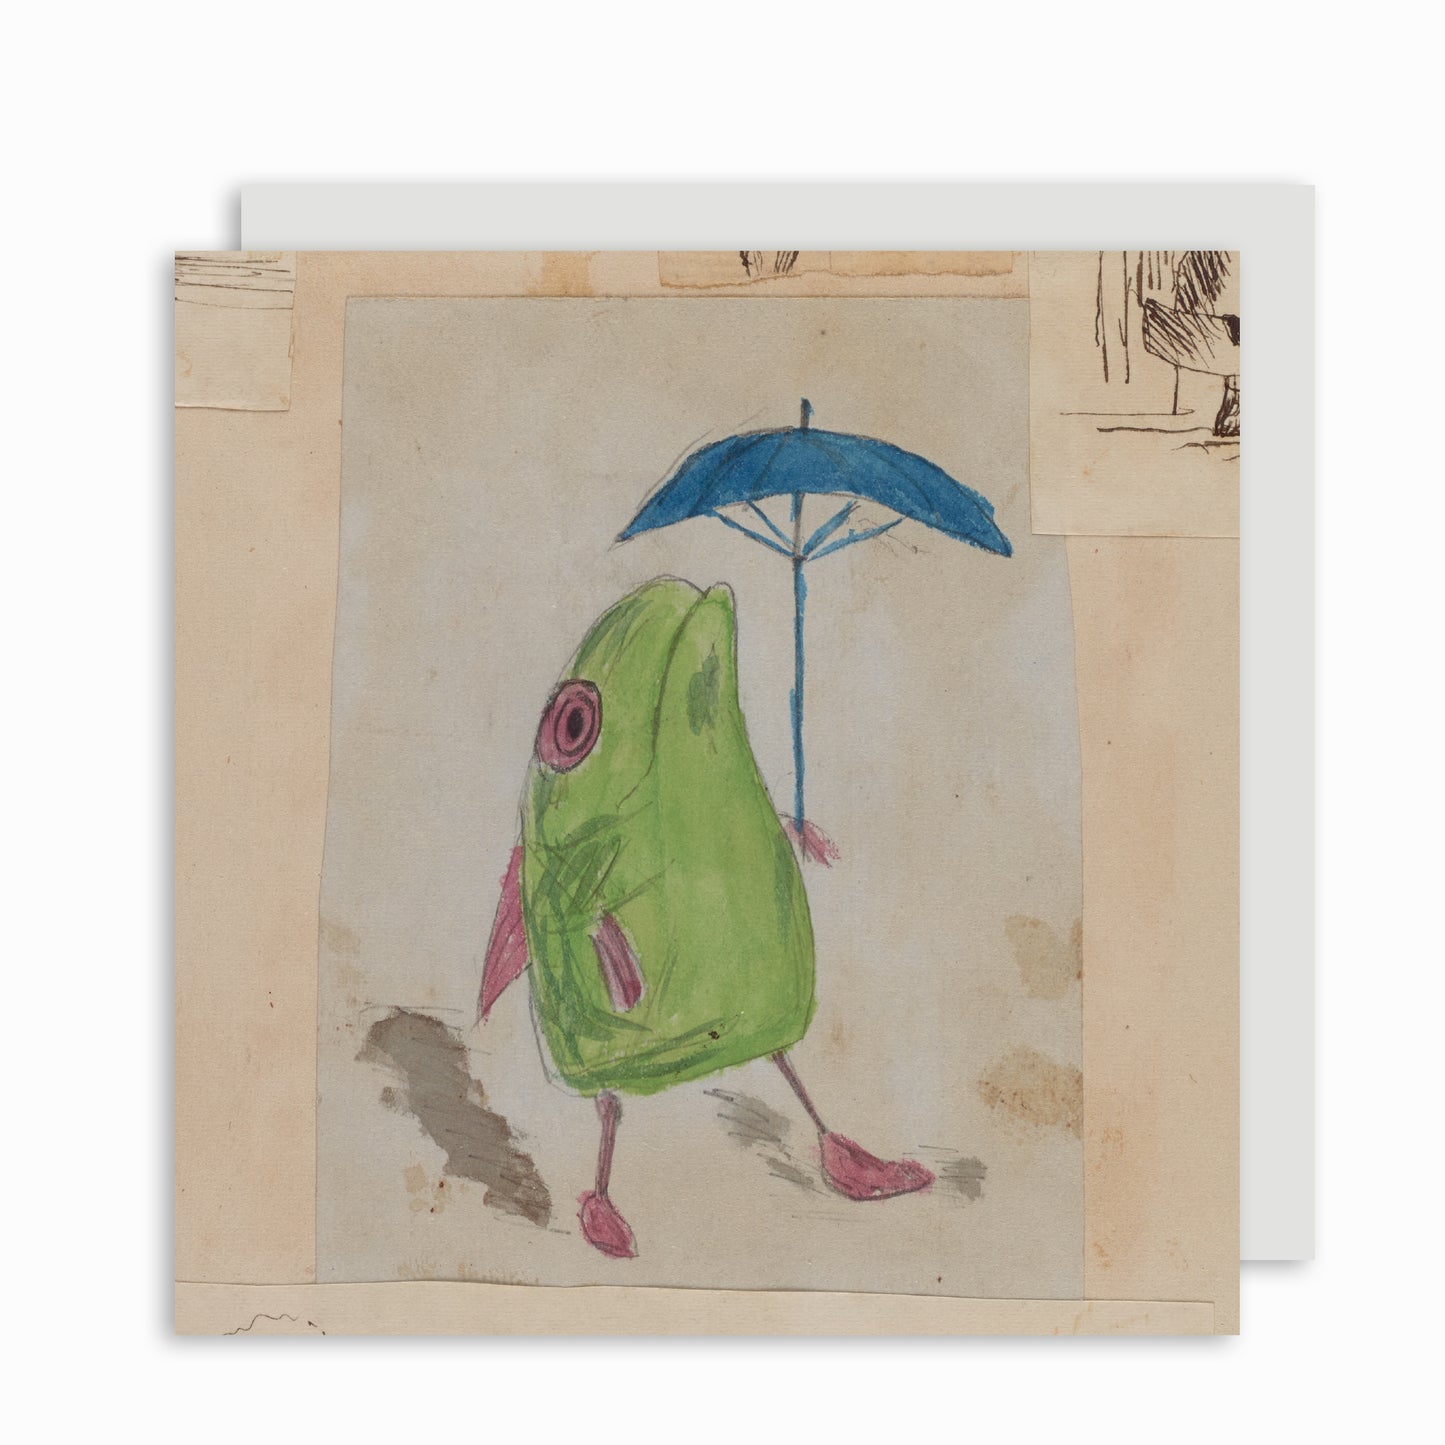 Square greeting card with children's drawing: a green and pink fish with blue umbrella. Drawn by one of Charles Darwin's children. From the Darwin Papers, Cambridge University Library.